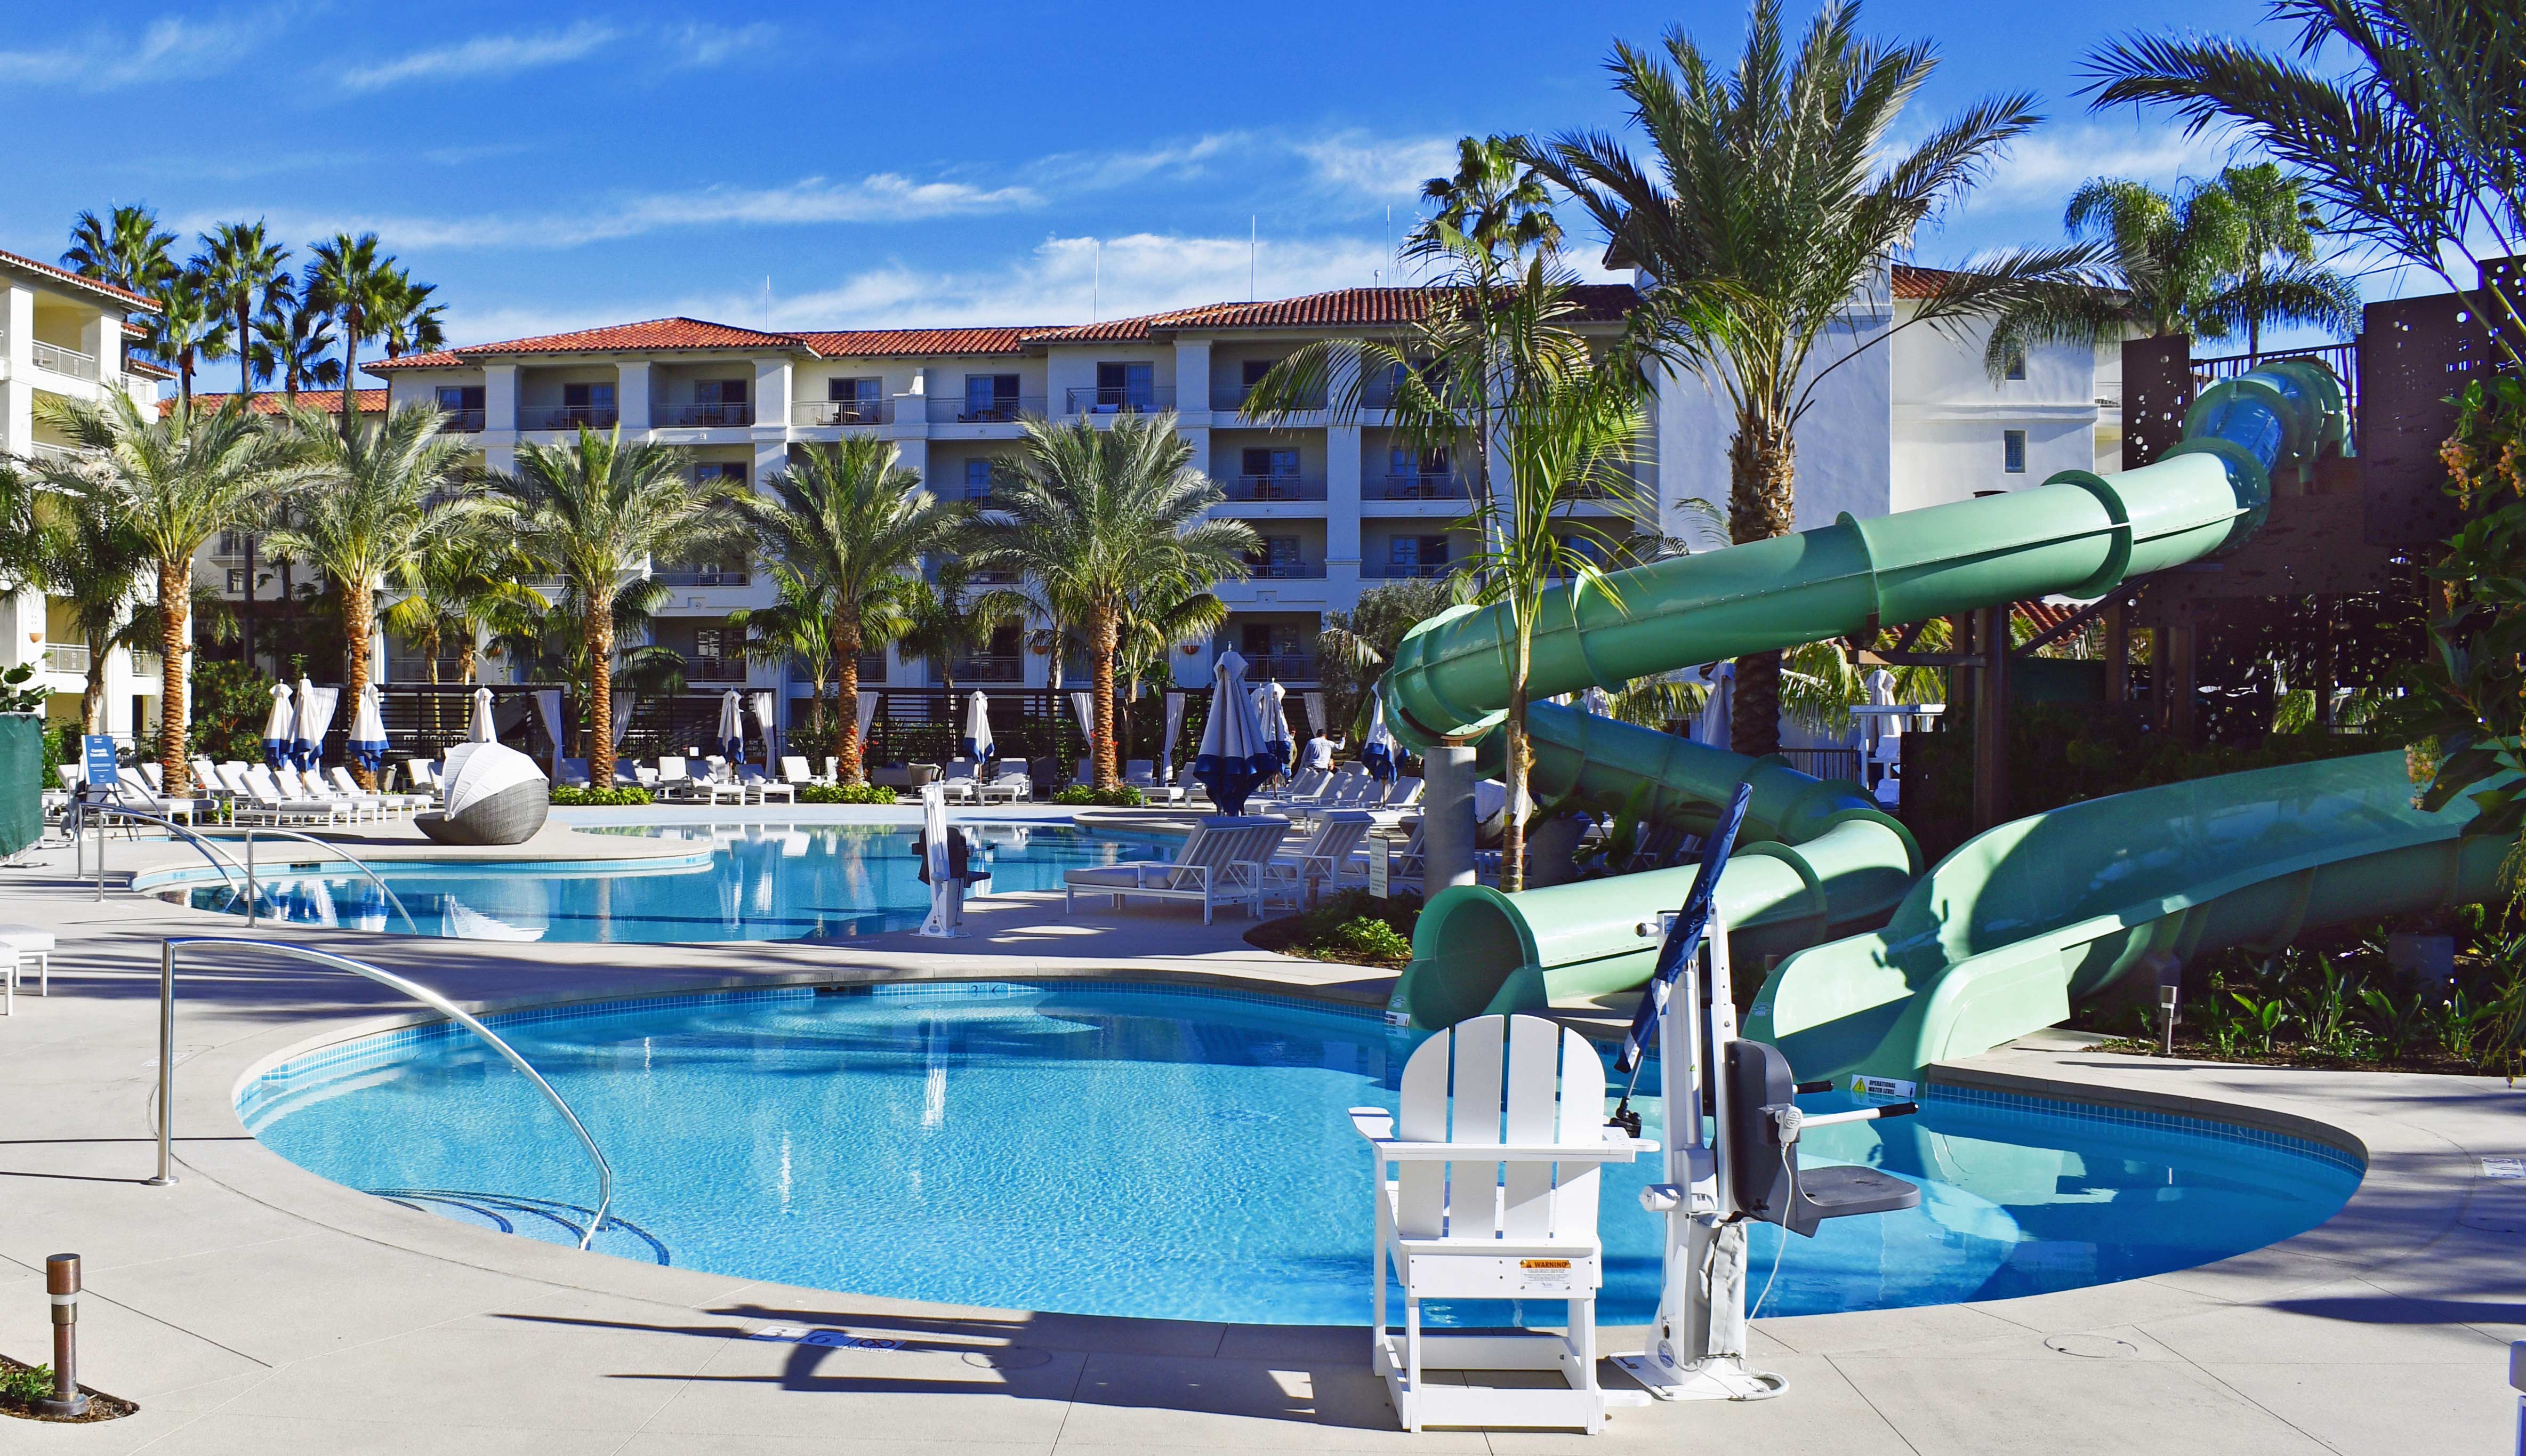 Hospitaltiy and Resort Pool with Water Slide